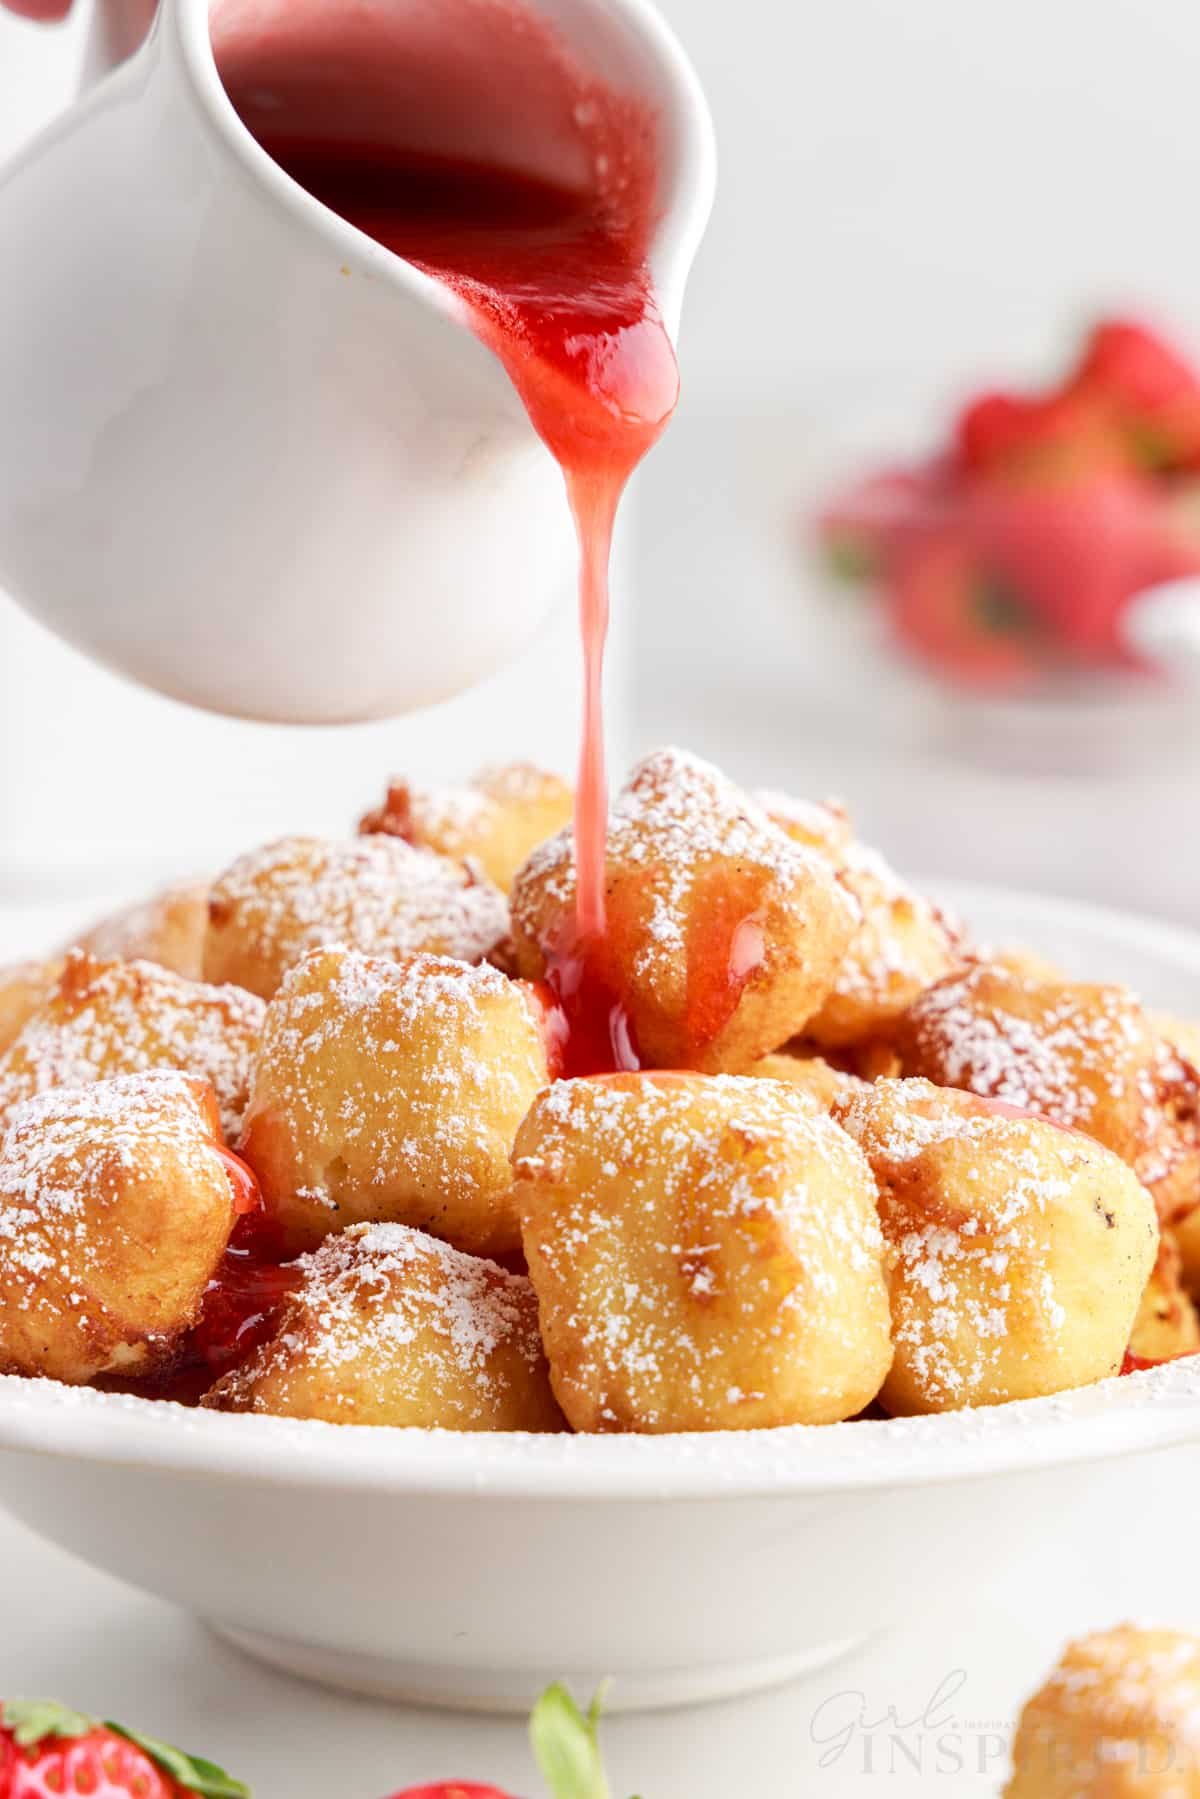 Strawberry sauce being drizzled on top of fried cheesecakes.